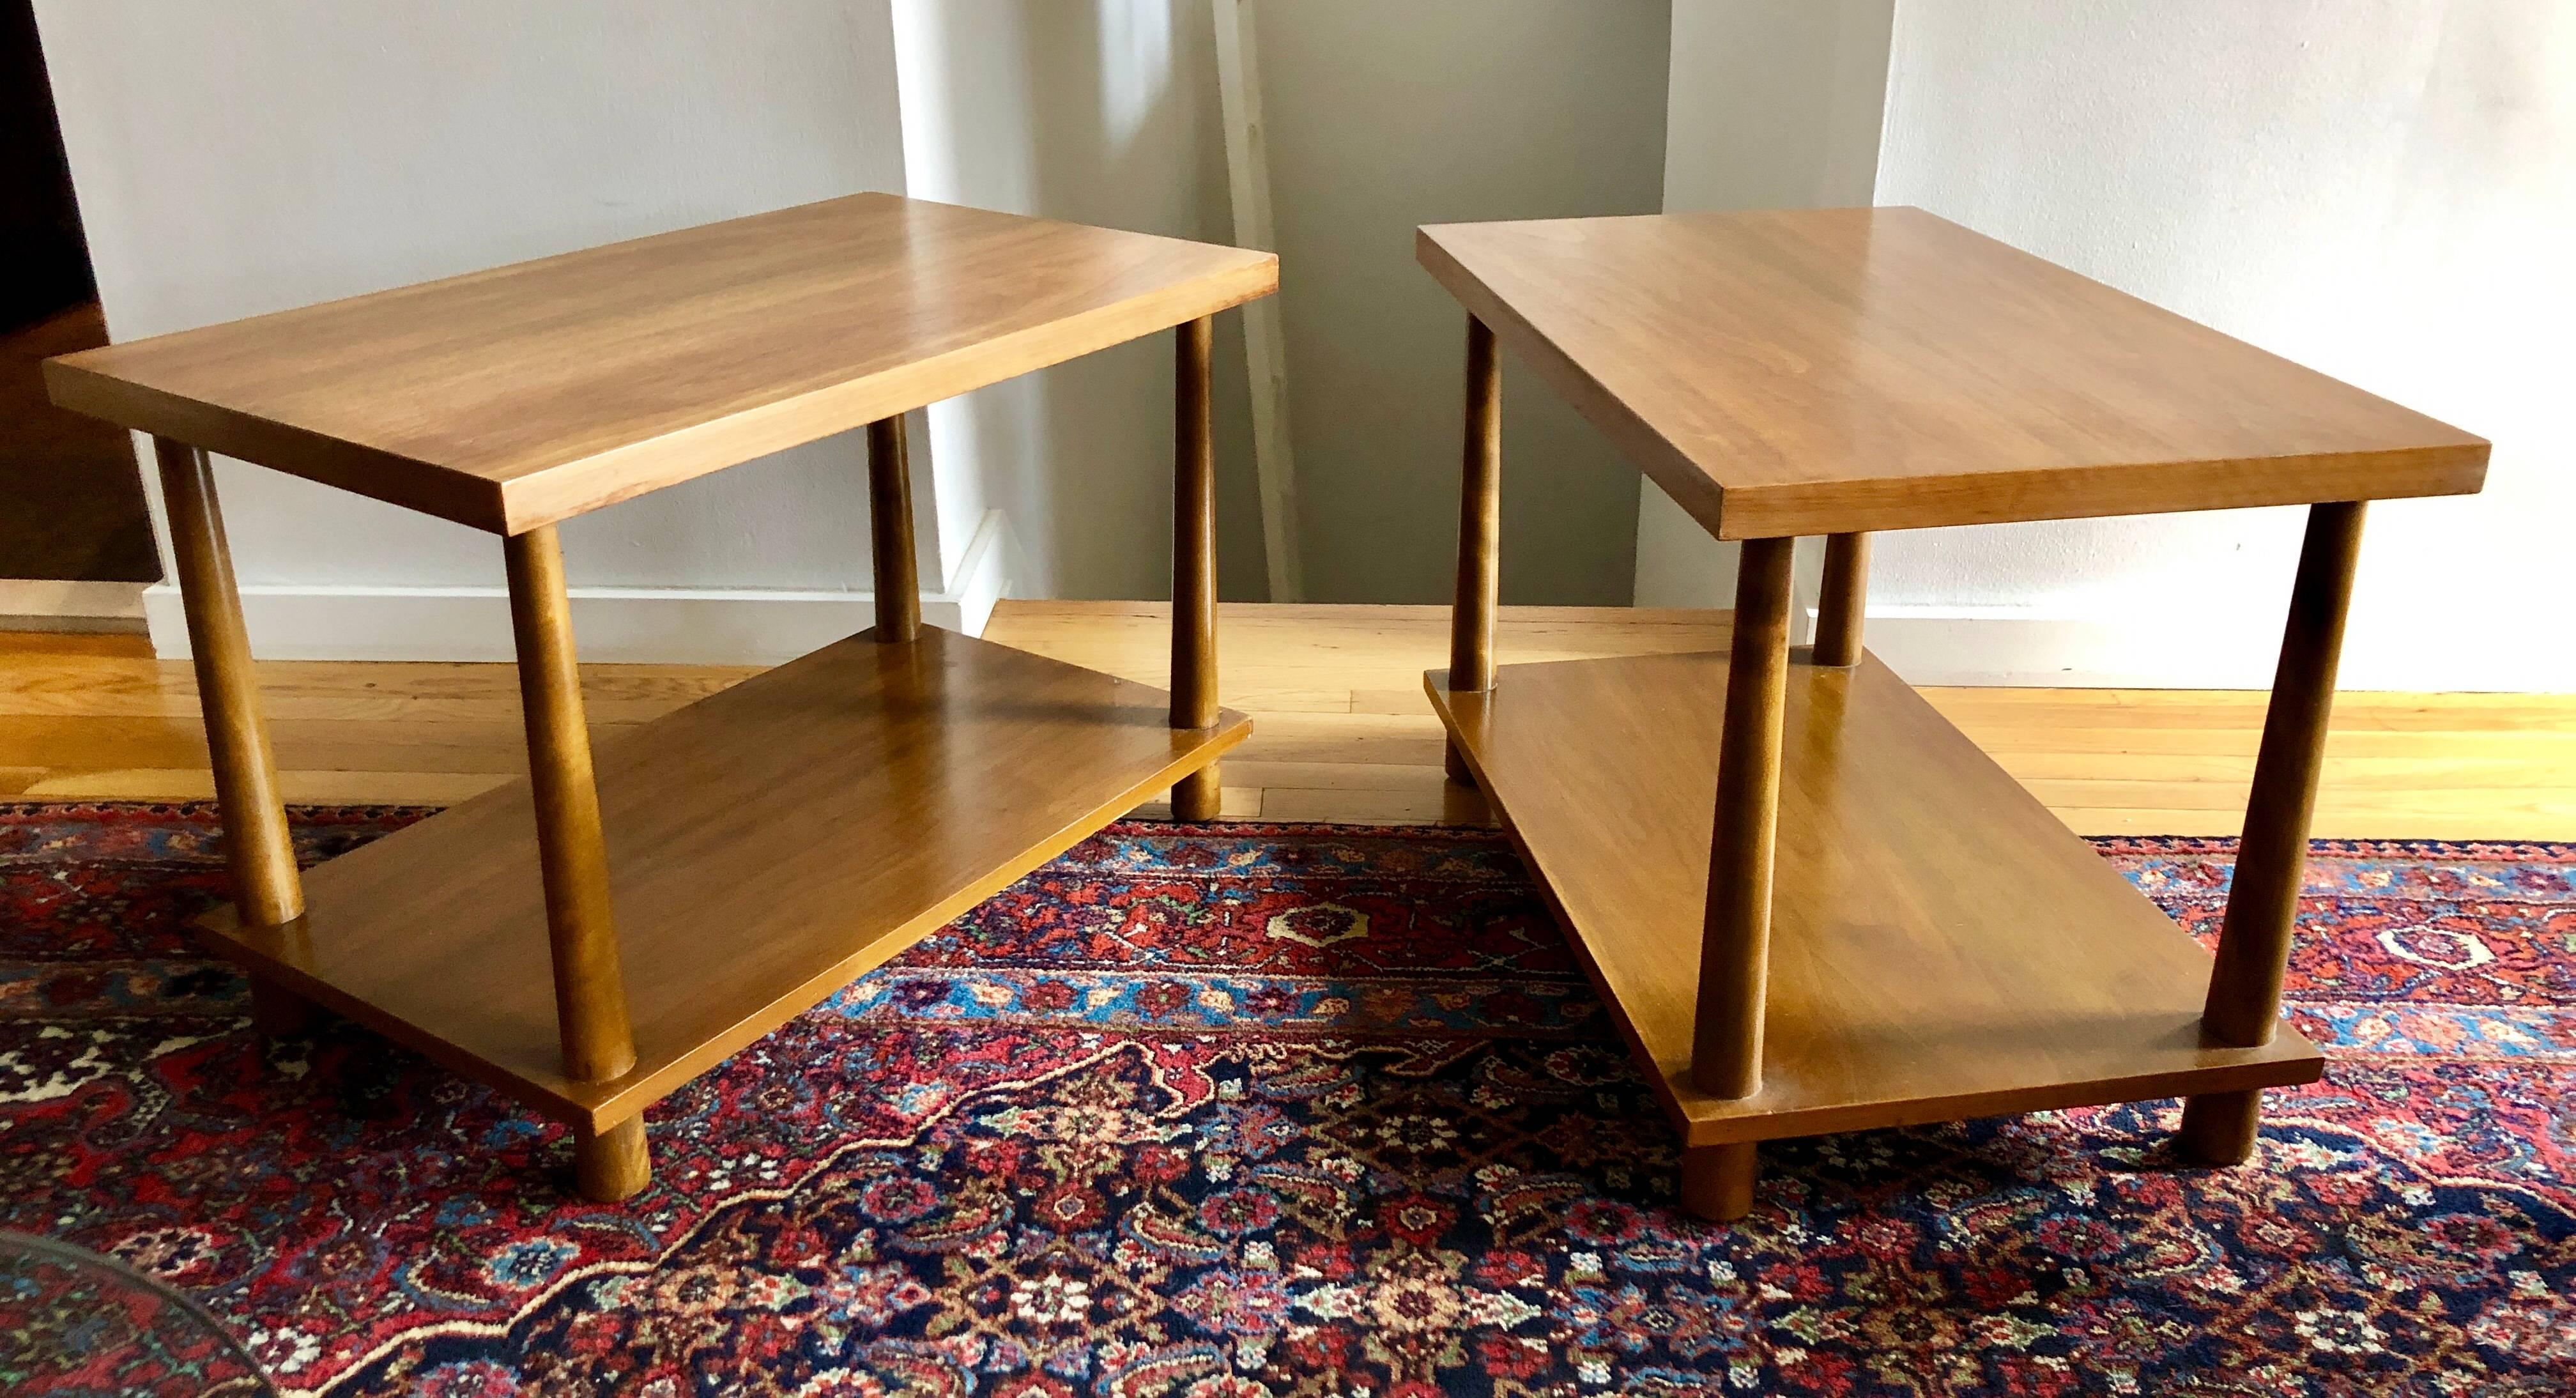 Classic Gibbings two-tier tables with inverse tapered dowel legs. Perfect proportions with through-dowel detail are an early expression of Gibbing's simplified modern elegance. With Widdicomb labels to underside.